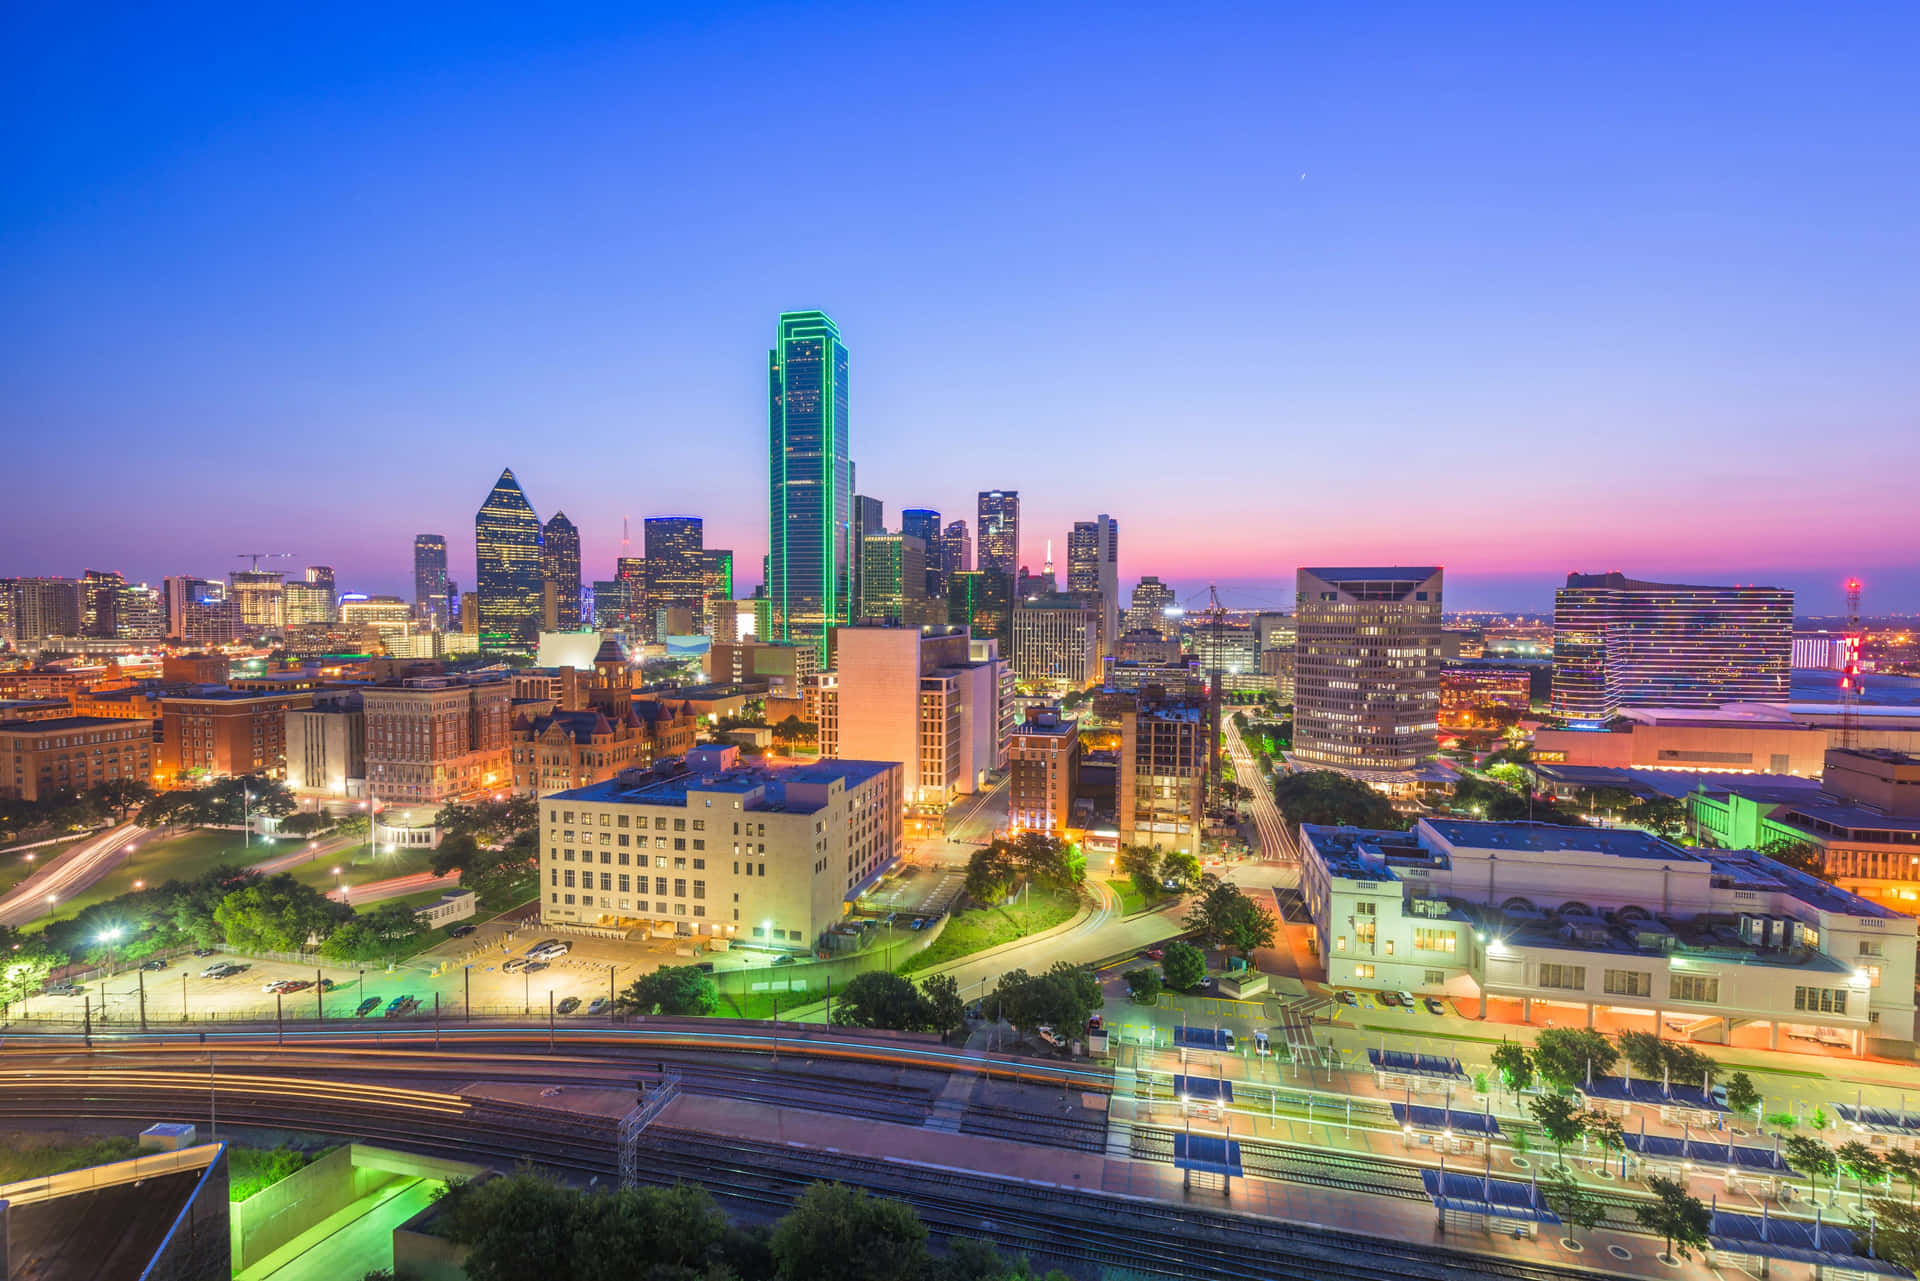 Spectacular Skyline View Of Dallas, Texas At Sunset Wallpaper